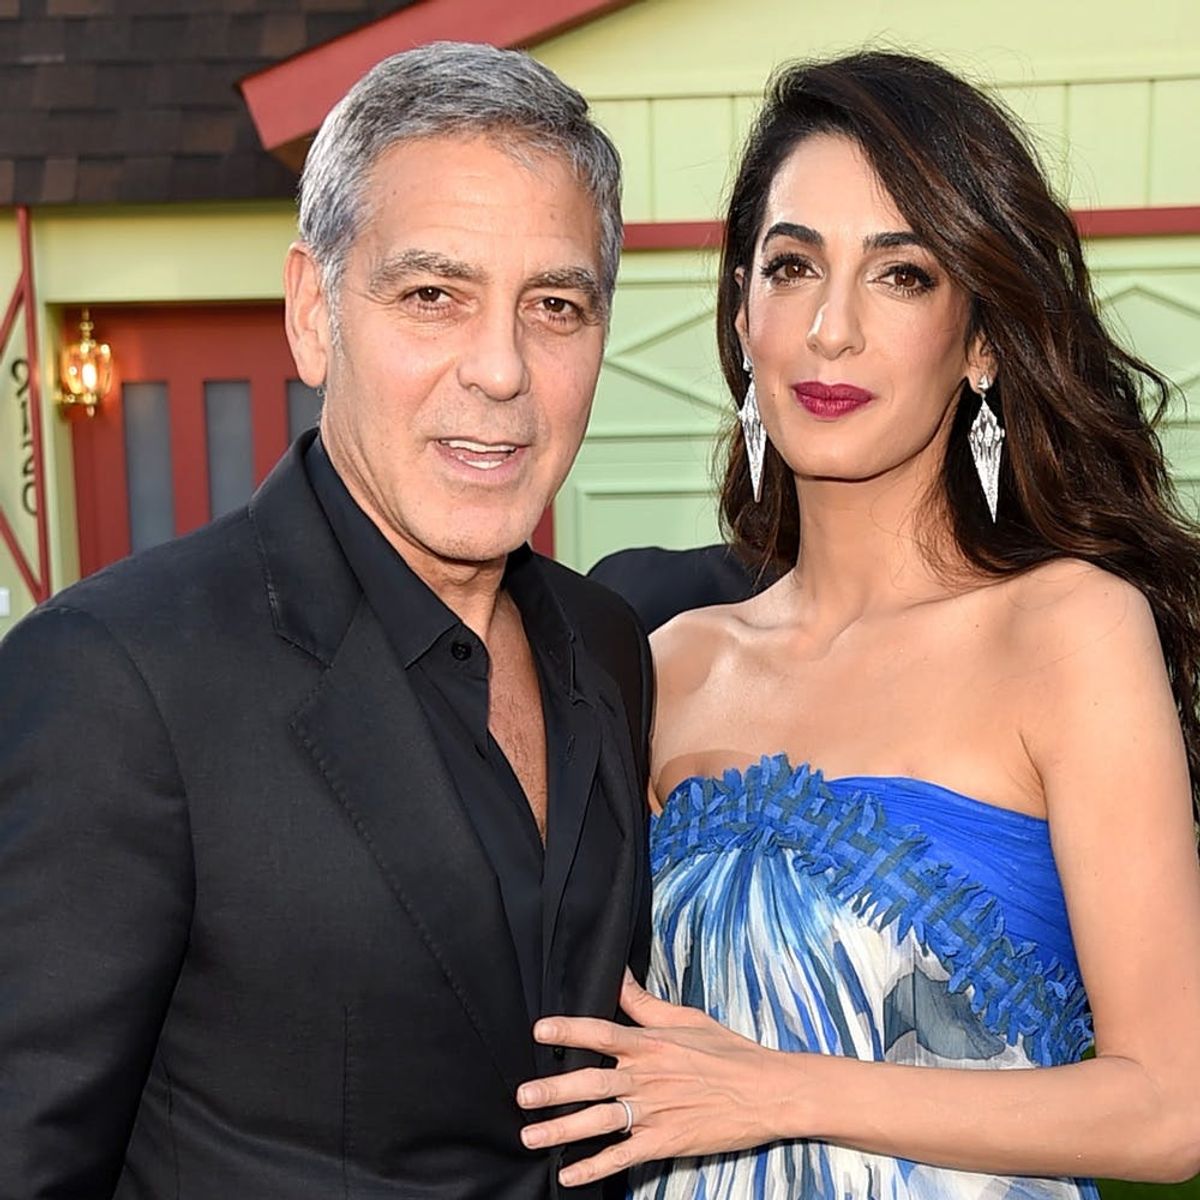 Watch George Clooney Reminisce About the Night He Met Amal